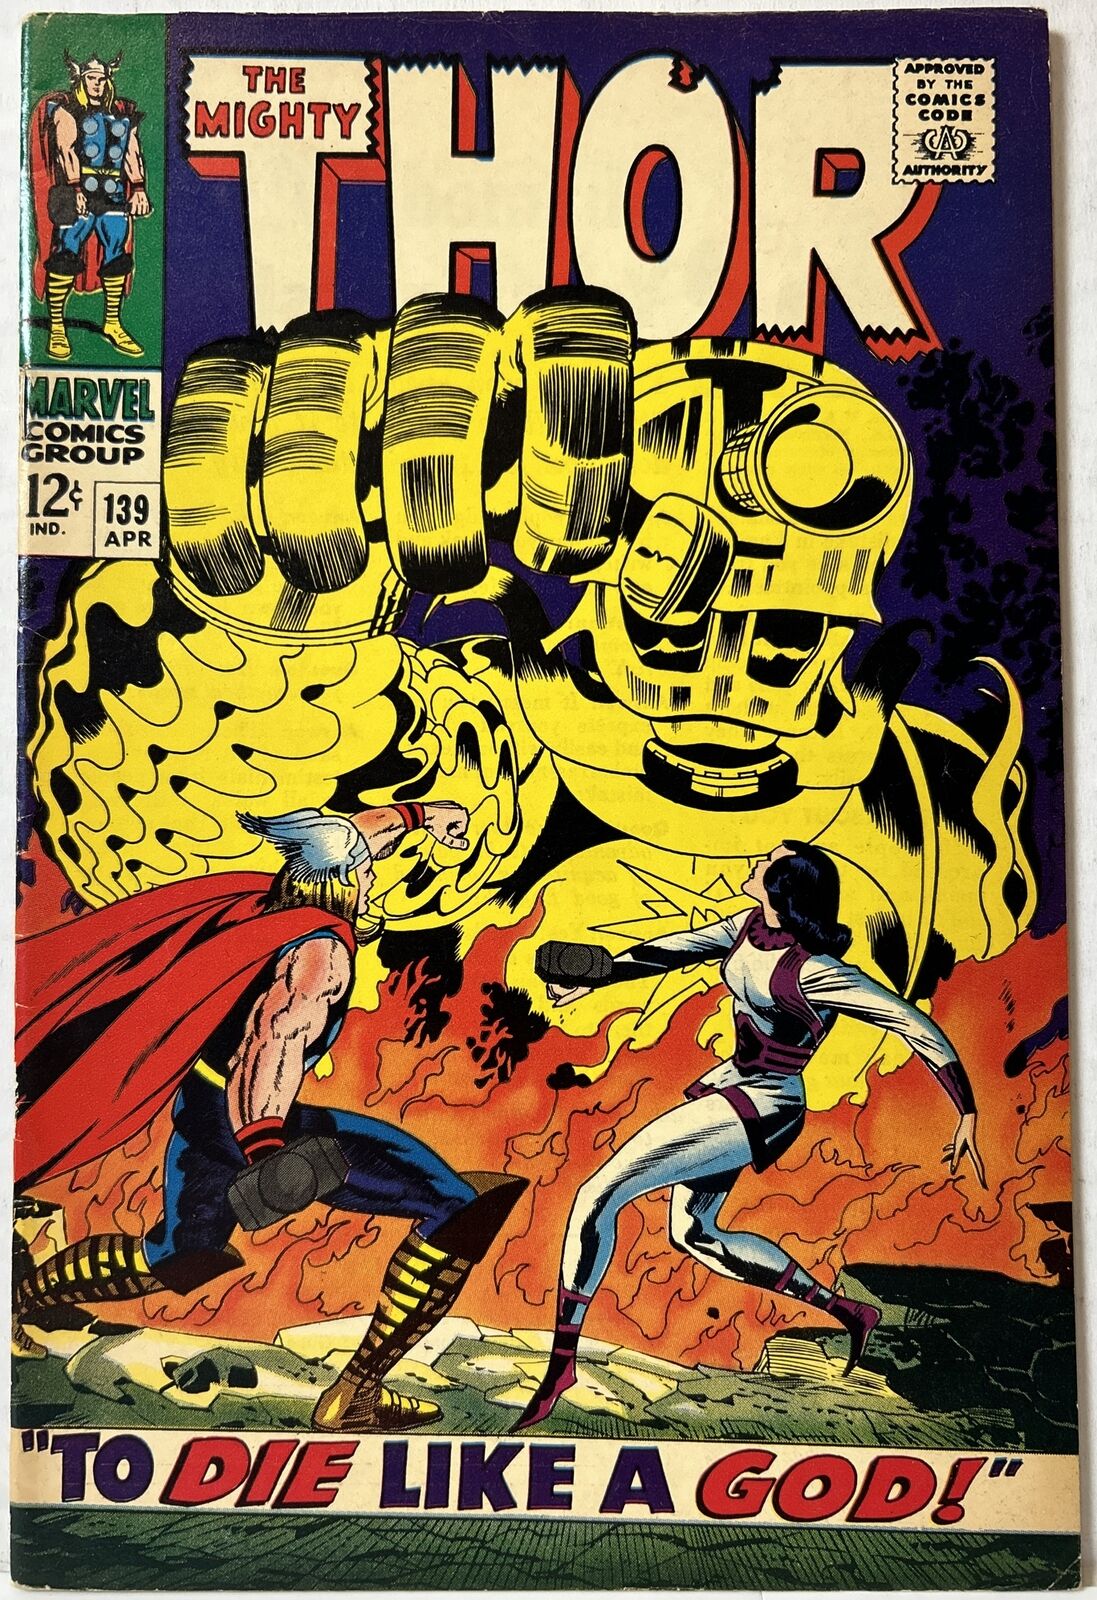 THOR #38 The Mighty THOR 139 KEY 1st Cover Appearance SIF Marvel *FN+*